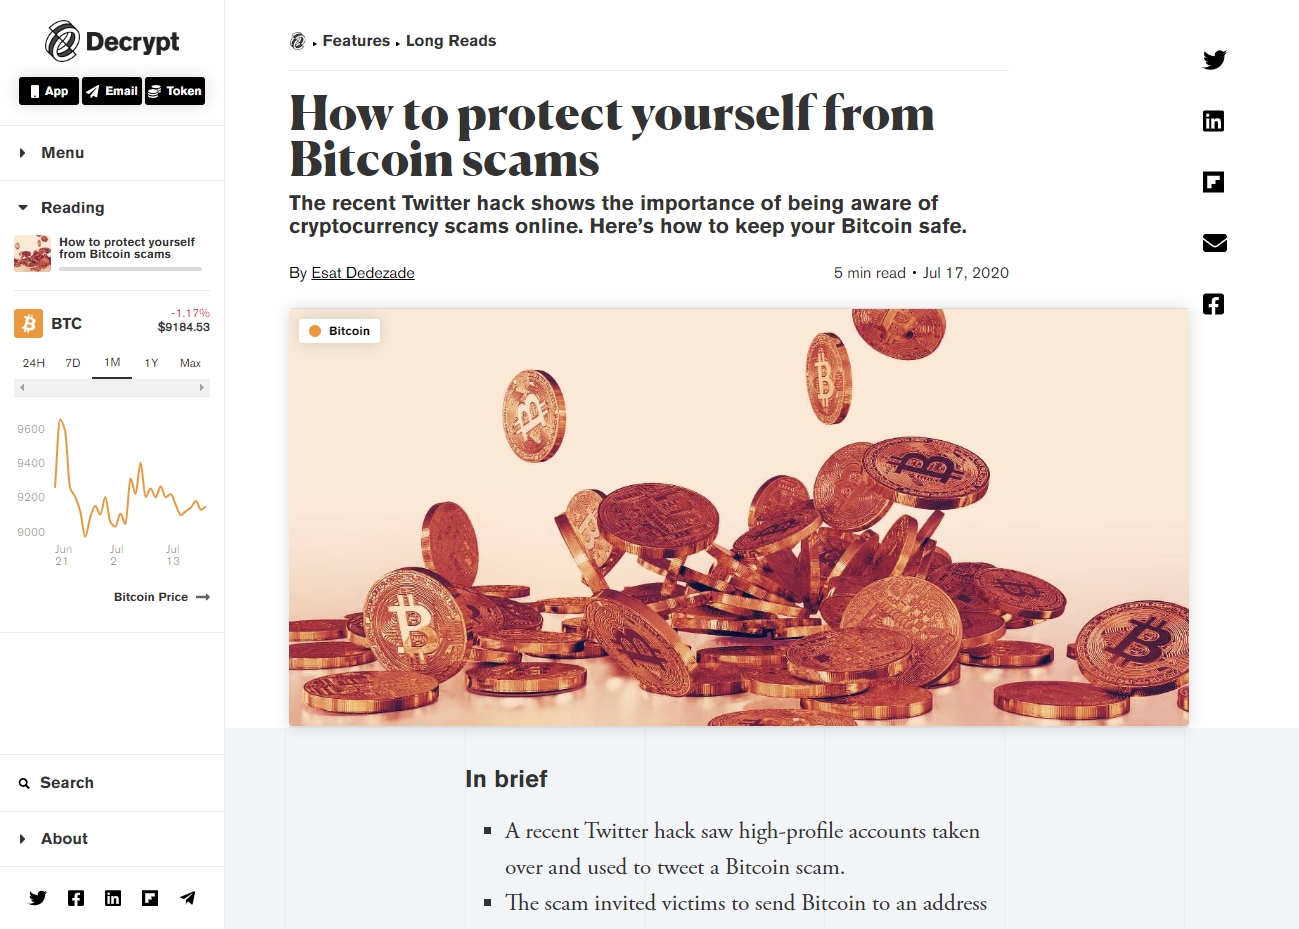 2020 07 21 Decrypt How to protect yourself from Bitcoin scams